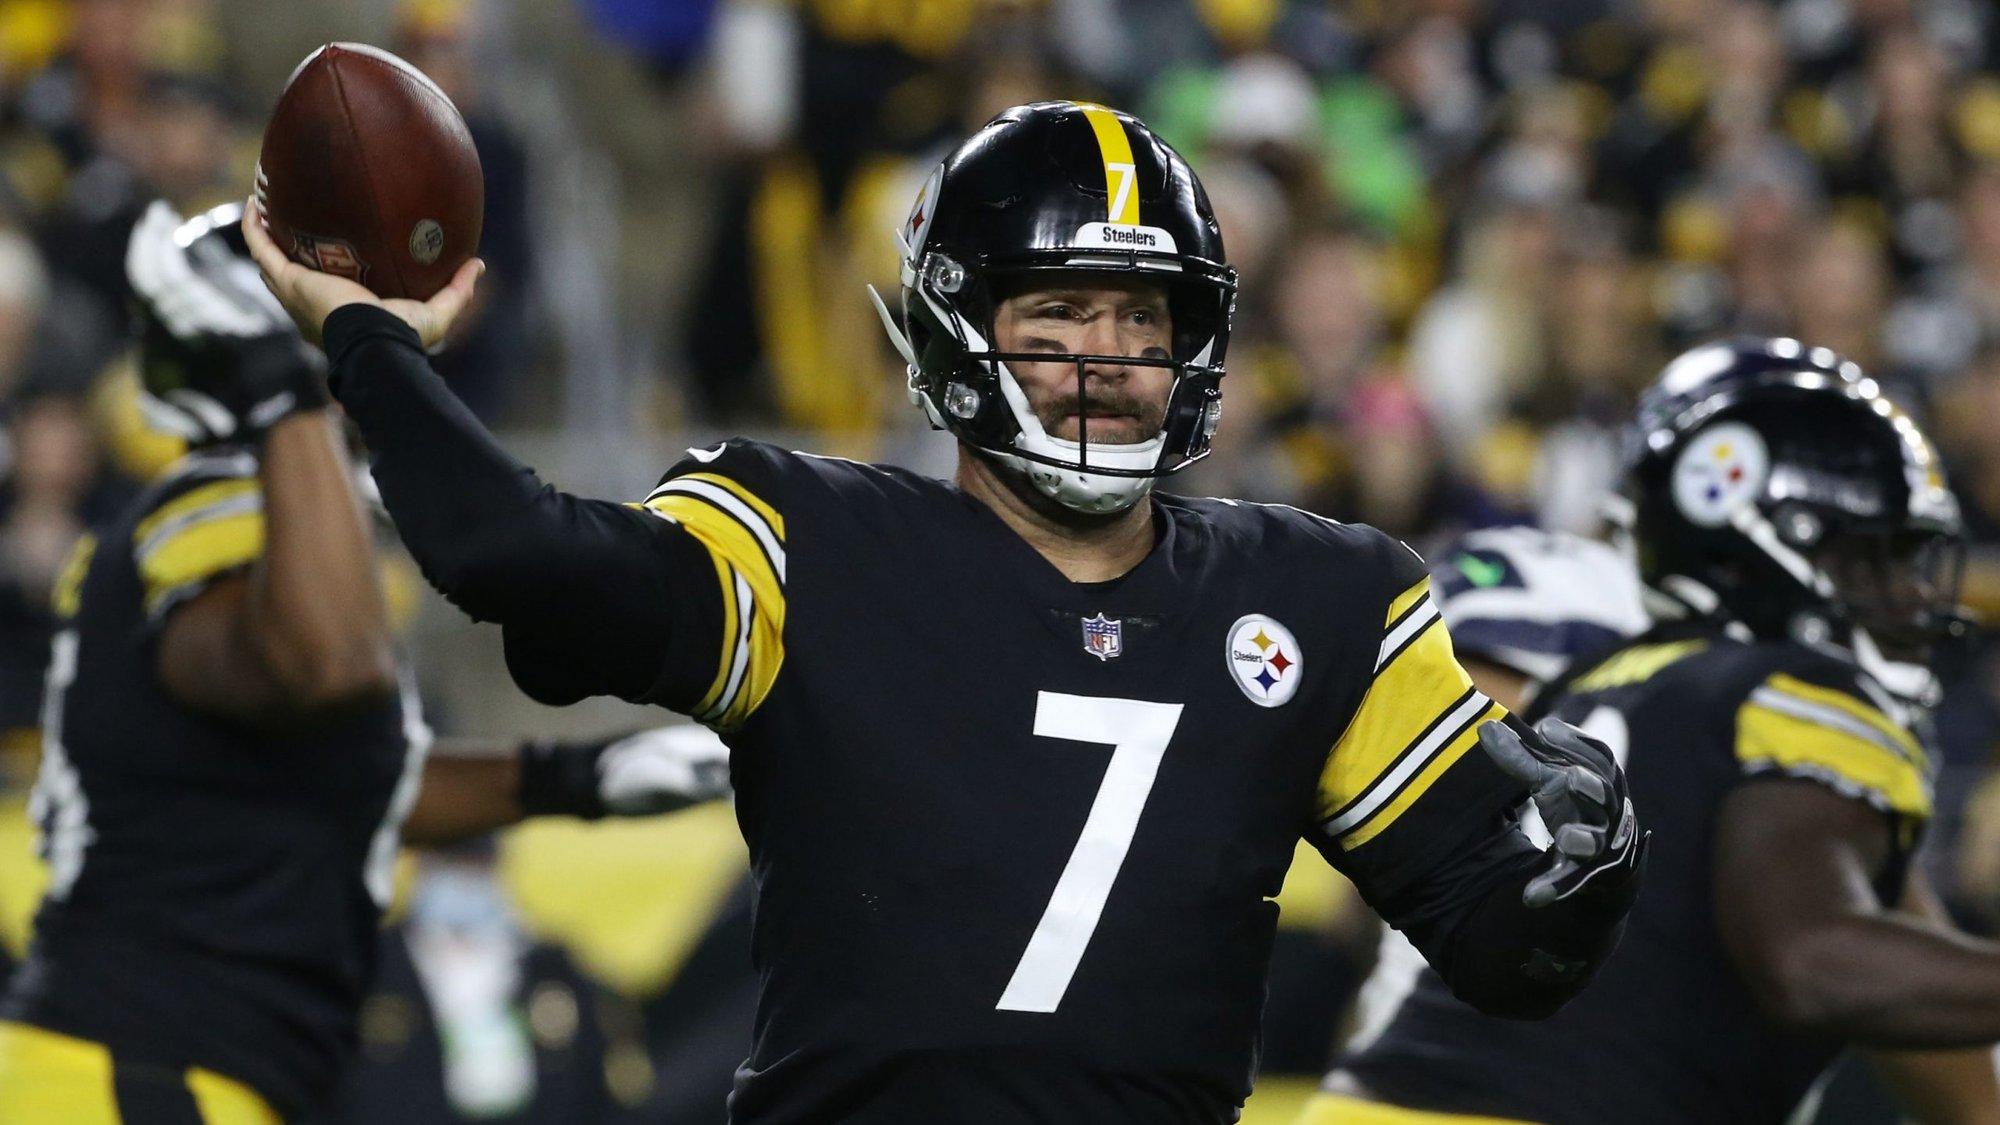 Cleveland Browns vs Pittsburgh Steelers Prediction and Best Bets: Steelers to Keep Playoff Hopes Alive With Win in Big Ben’s Likely Home Finale